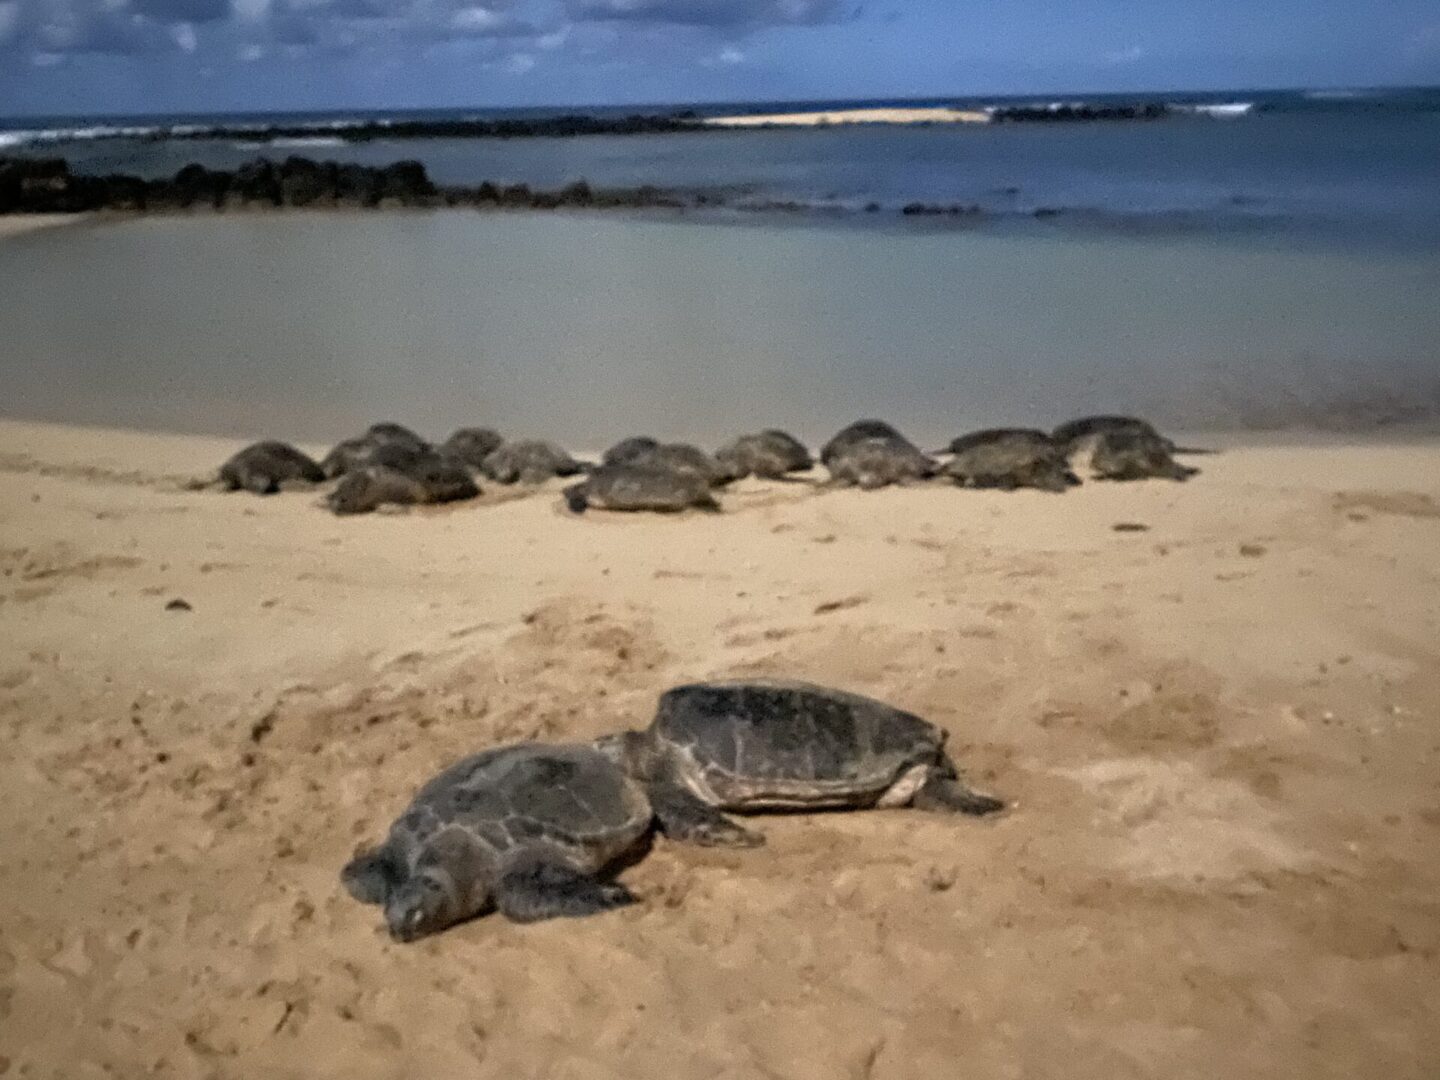 Group of turtles on a sea beach